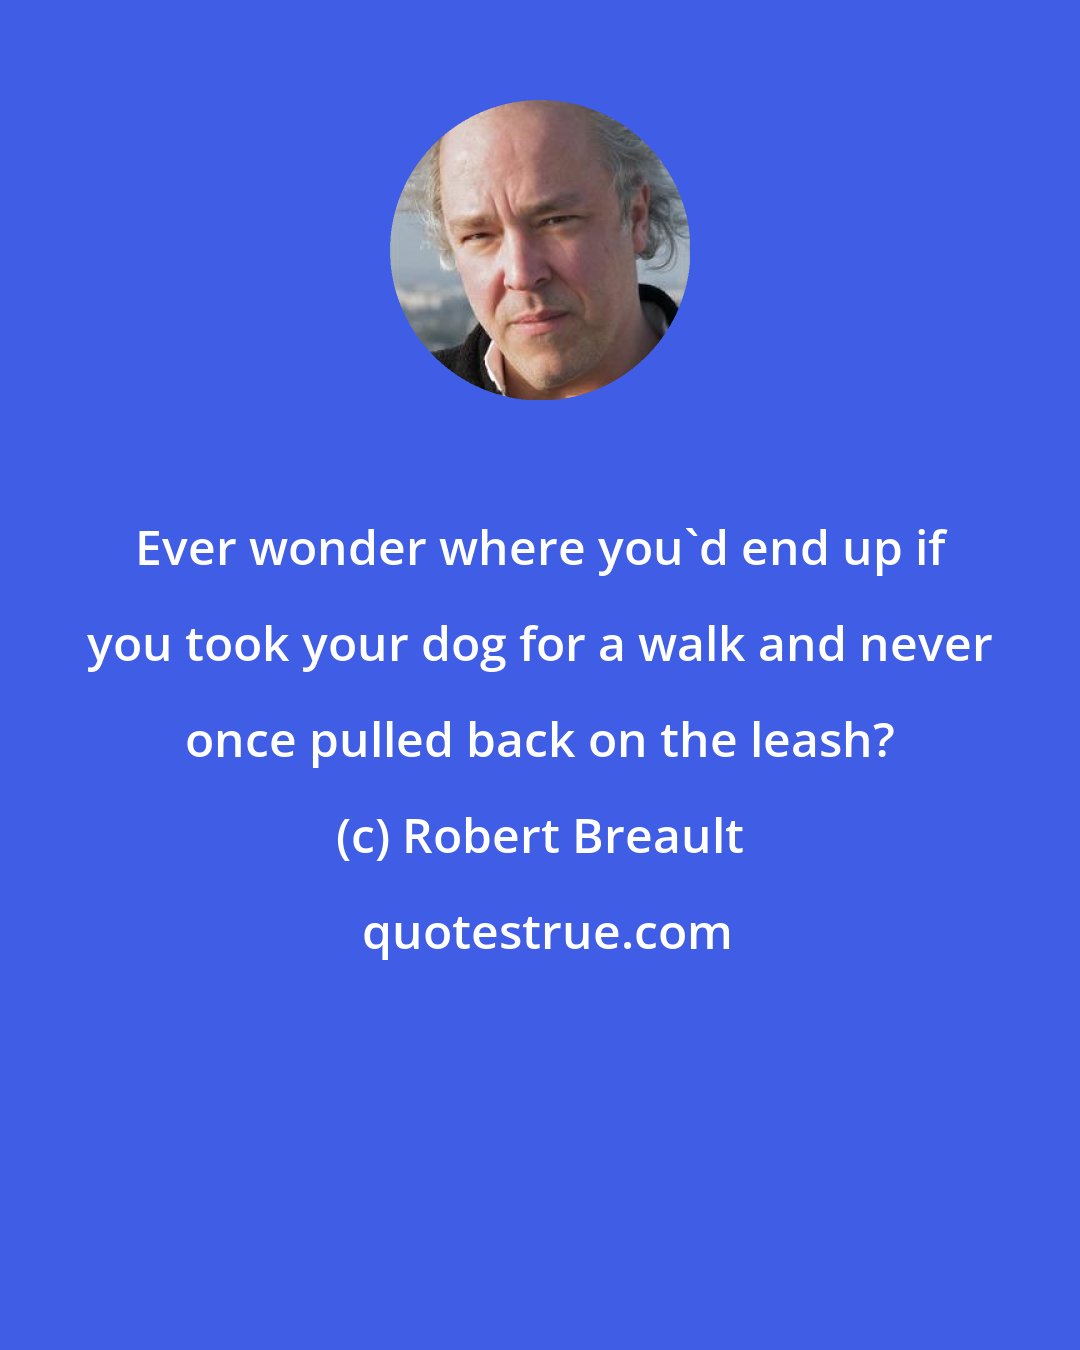 Robert Breault: Ever wonder where you'd end up if you took your dog for a walk and never once pulled back on the leash?